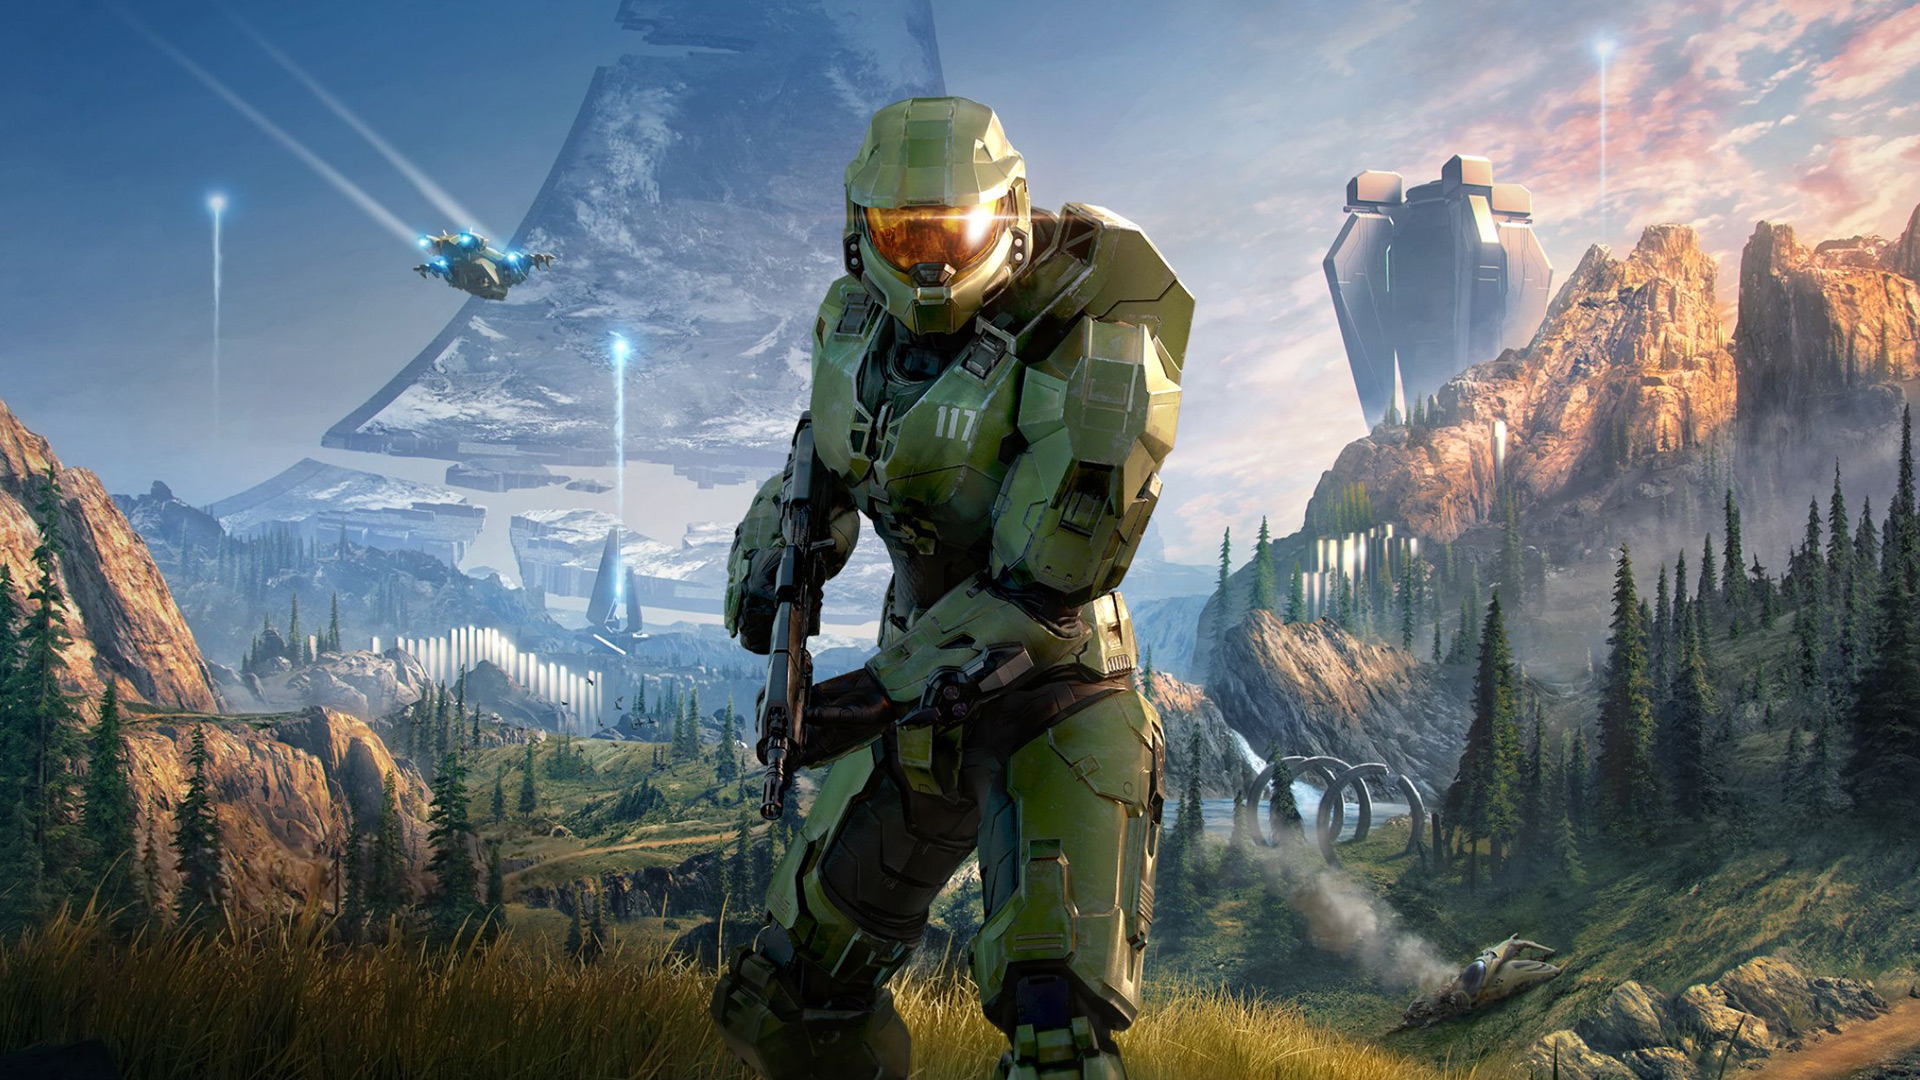 Halo games in order: Halo Infinite art showing a battle-ready Master Chief against the verdant hills of a Halo ring.